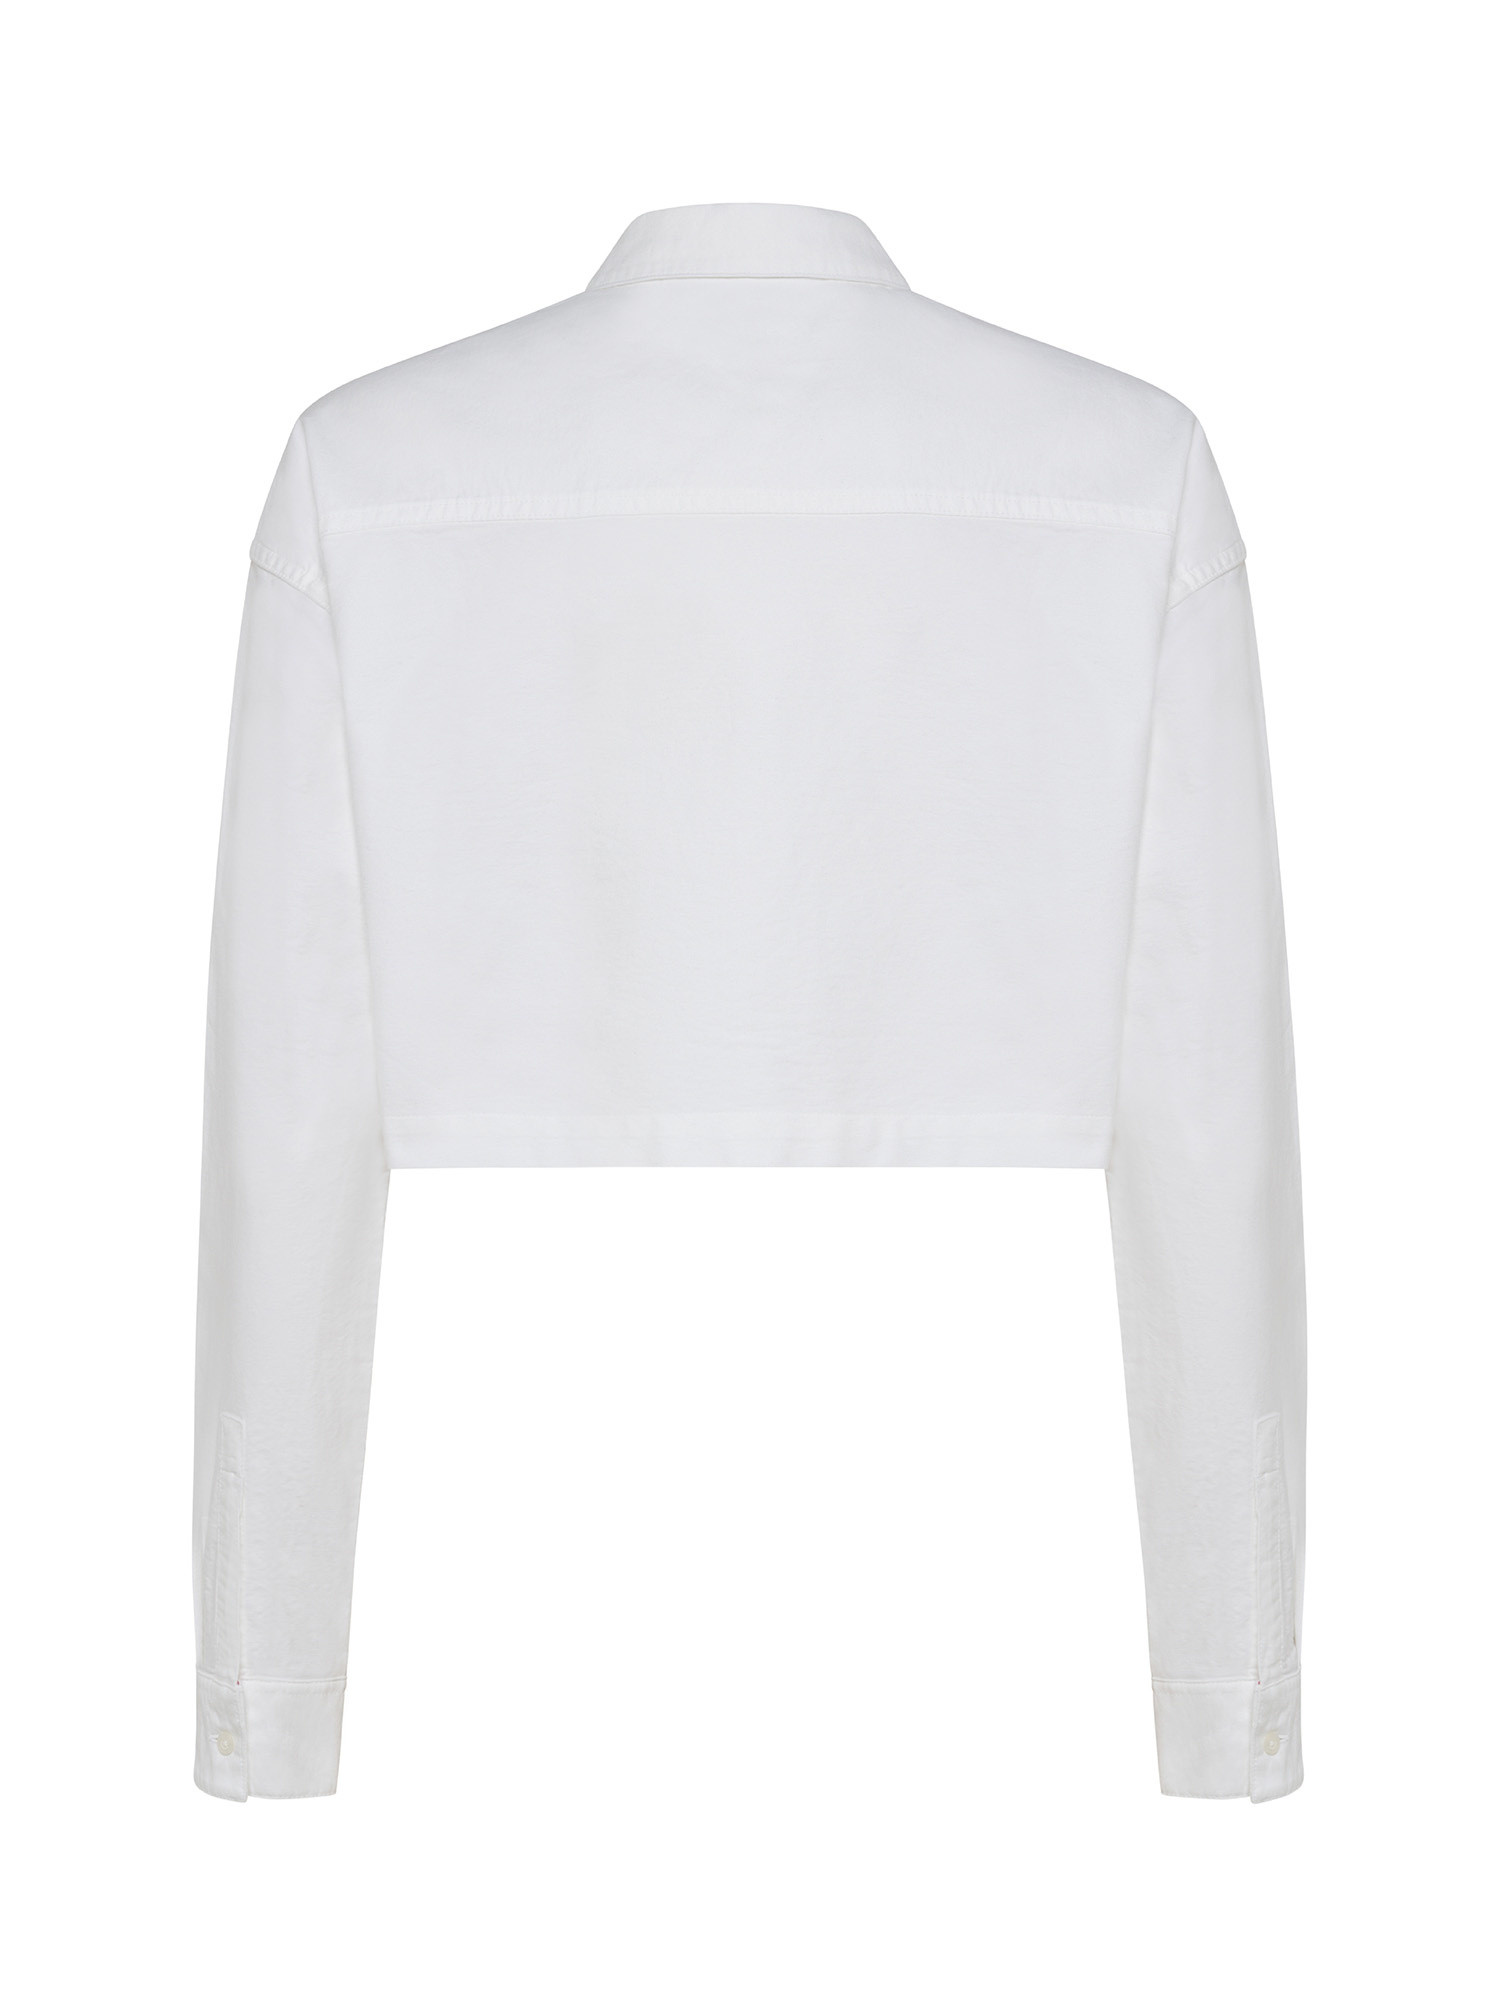 Tommy Jeans - Cropped shirt with logo on the pocket, White, large image number 1